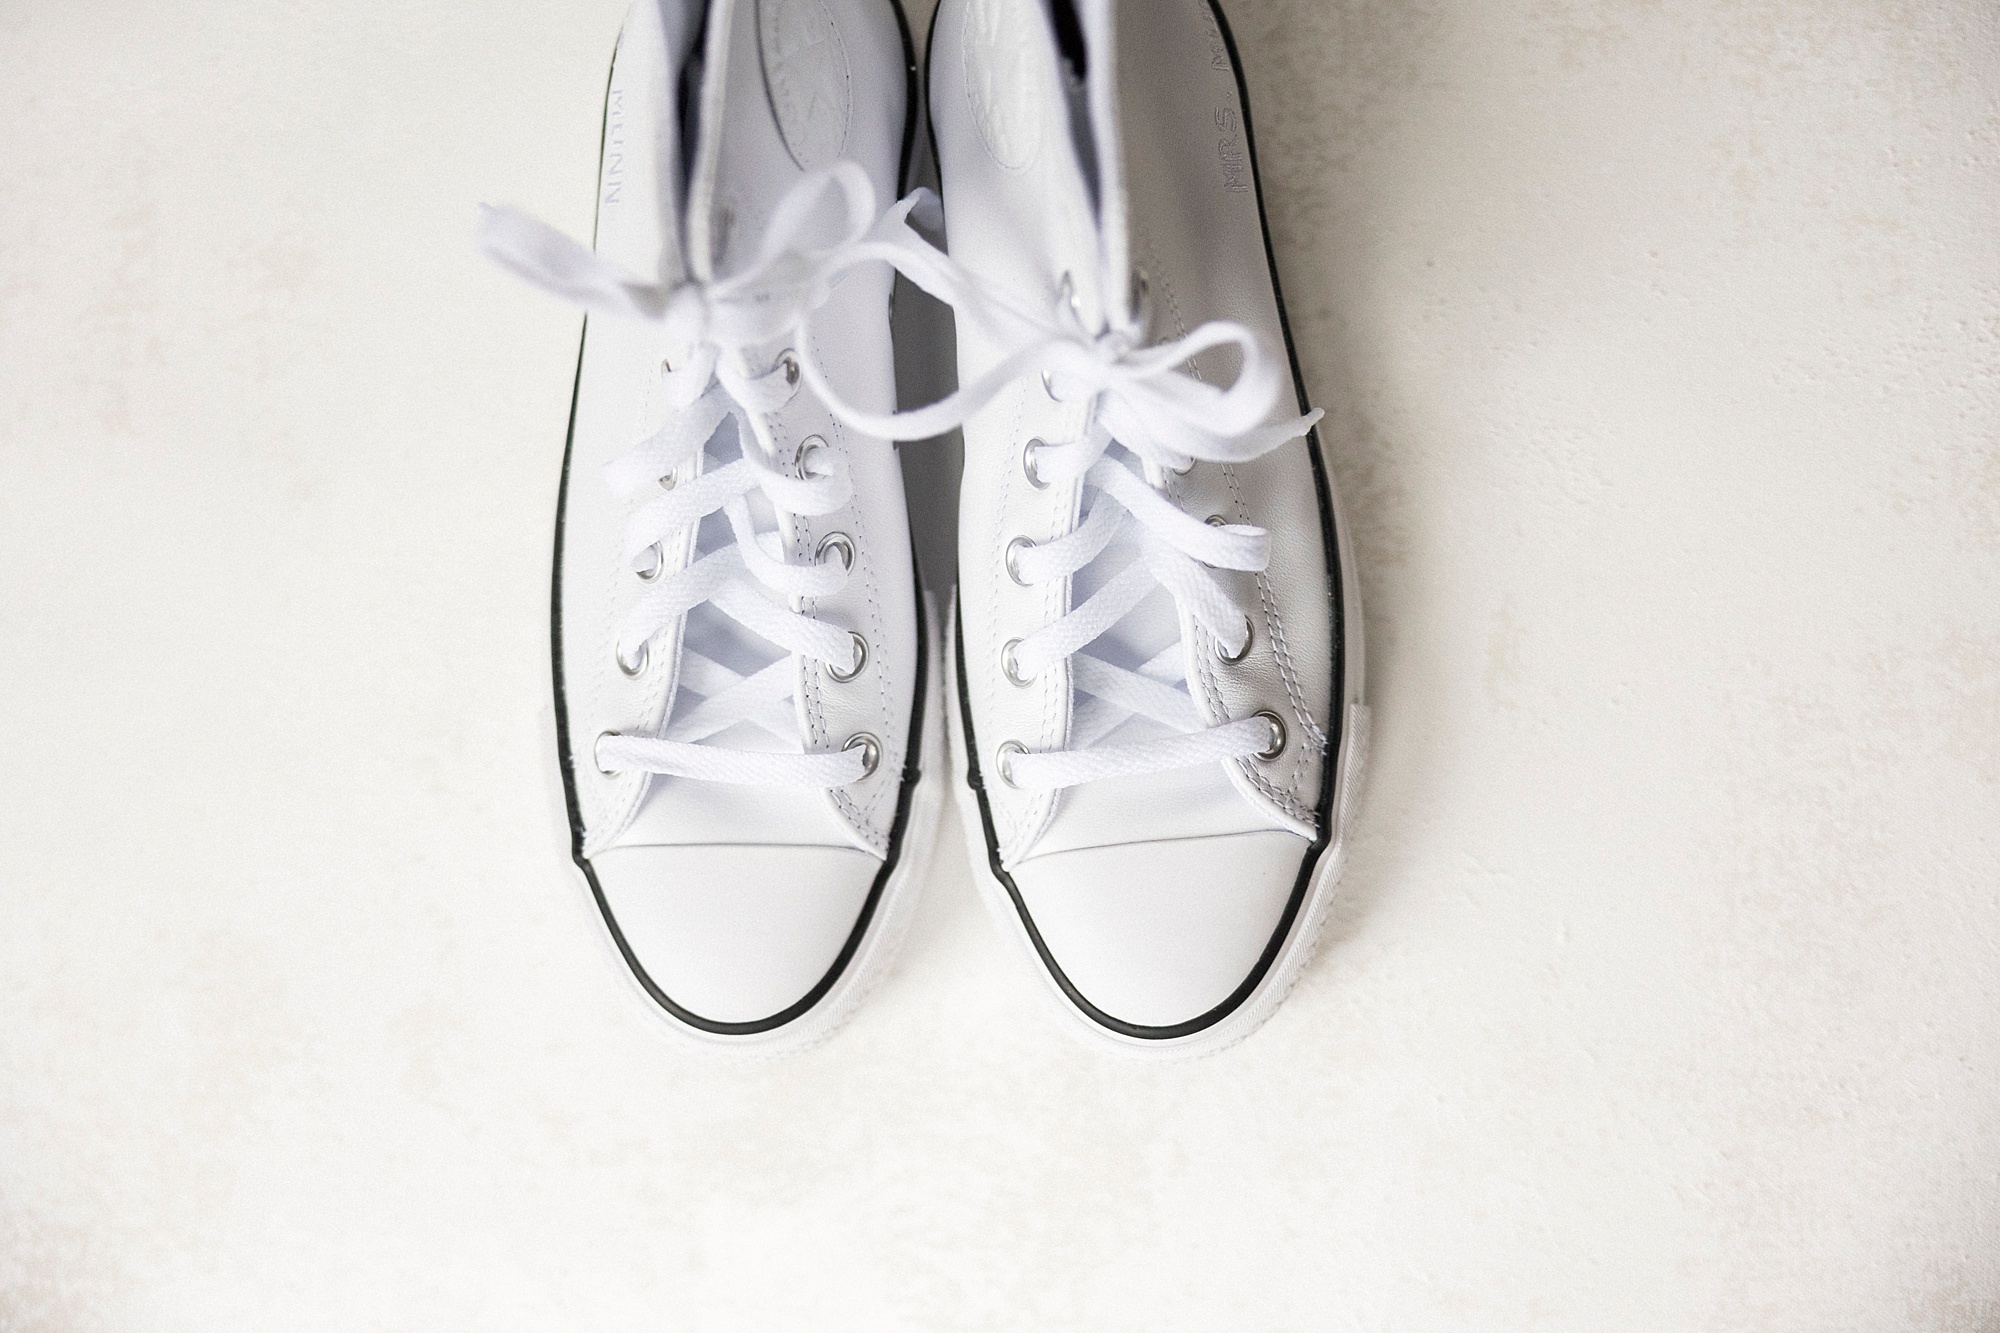 bride's white converse shoes for wedding day